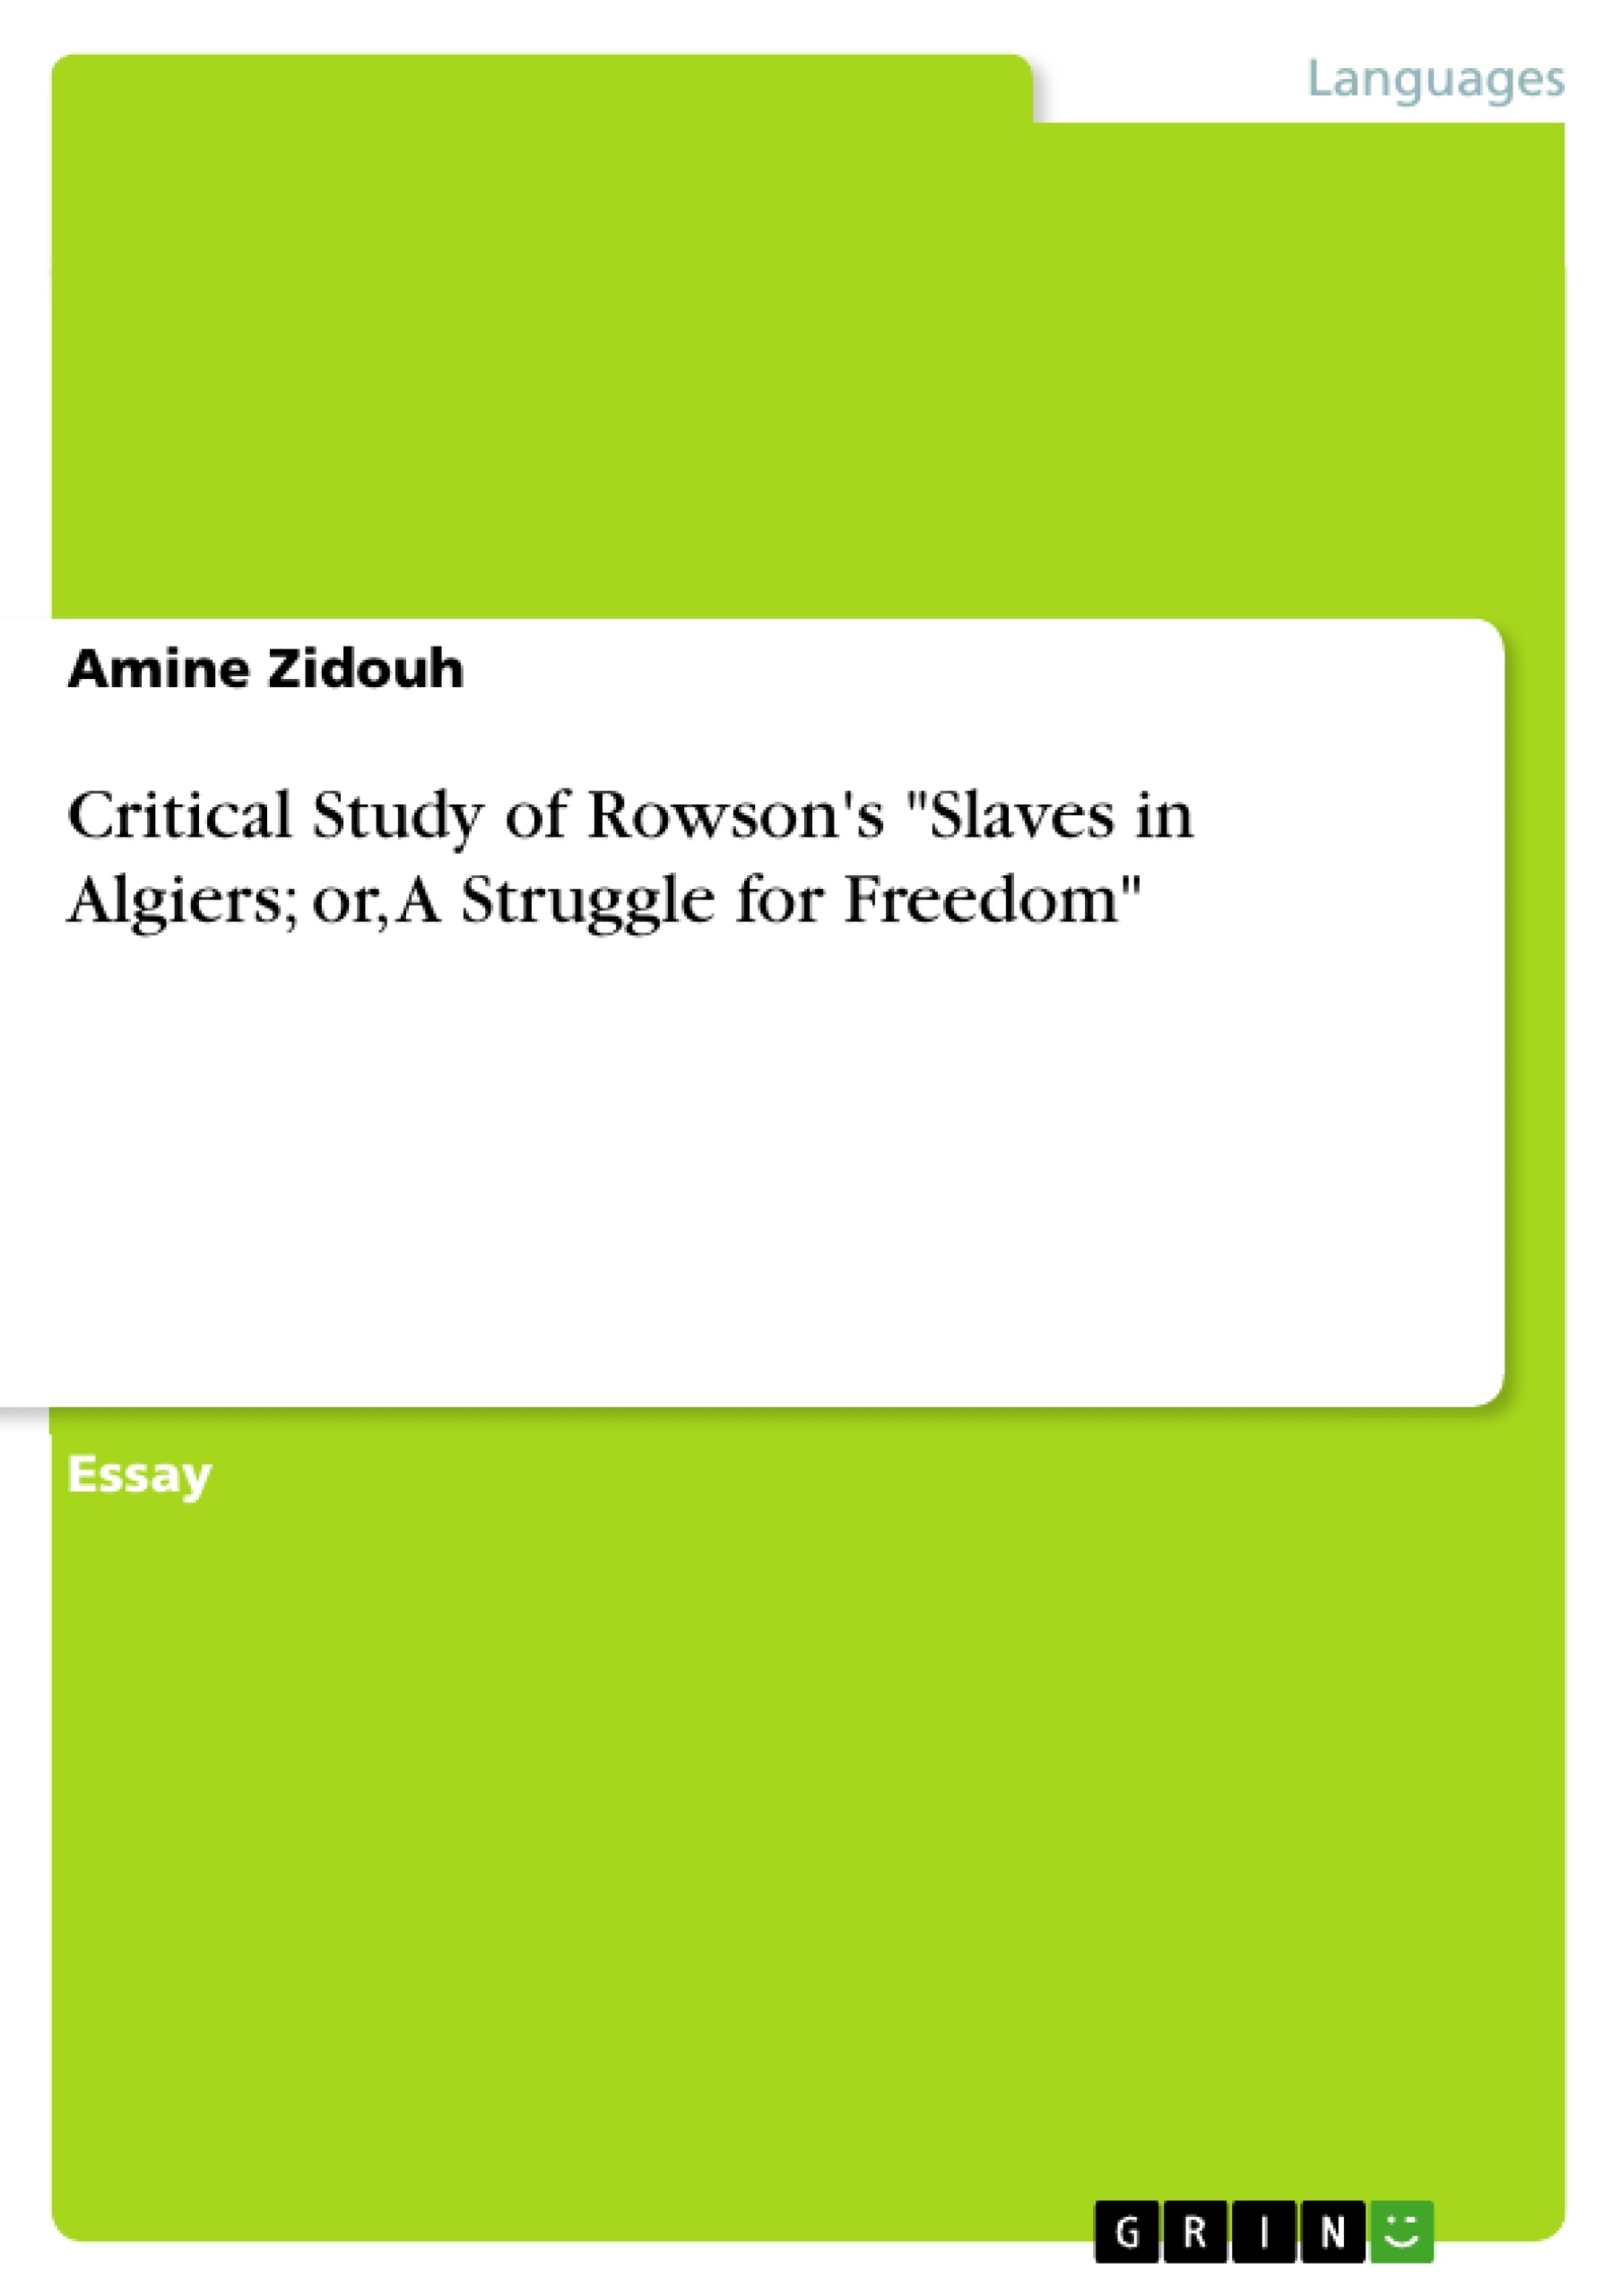 Title: Critical Study of Rowson's "Slaves in Algiers; or, A Struggle for Freedom"